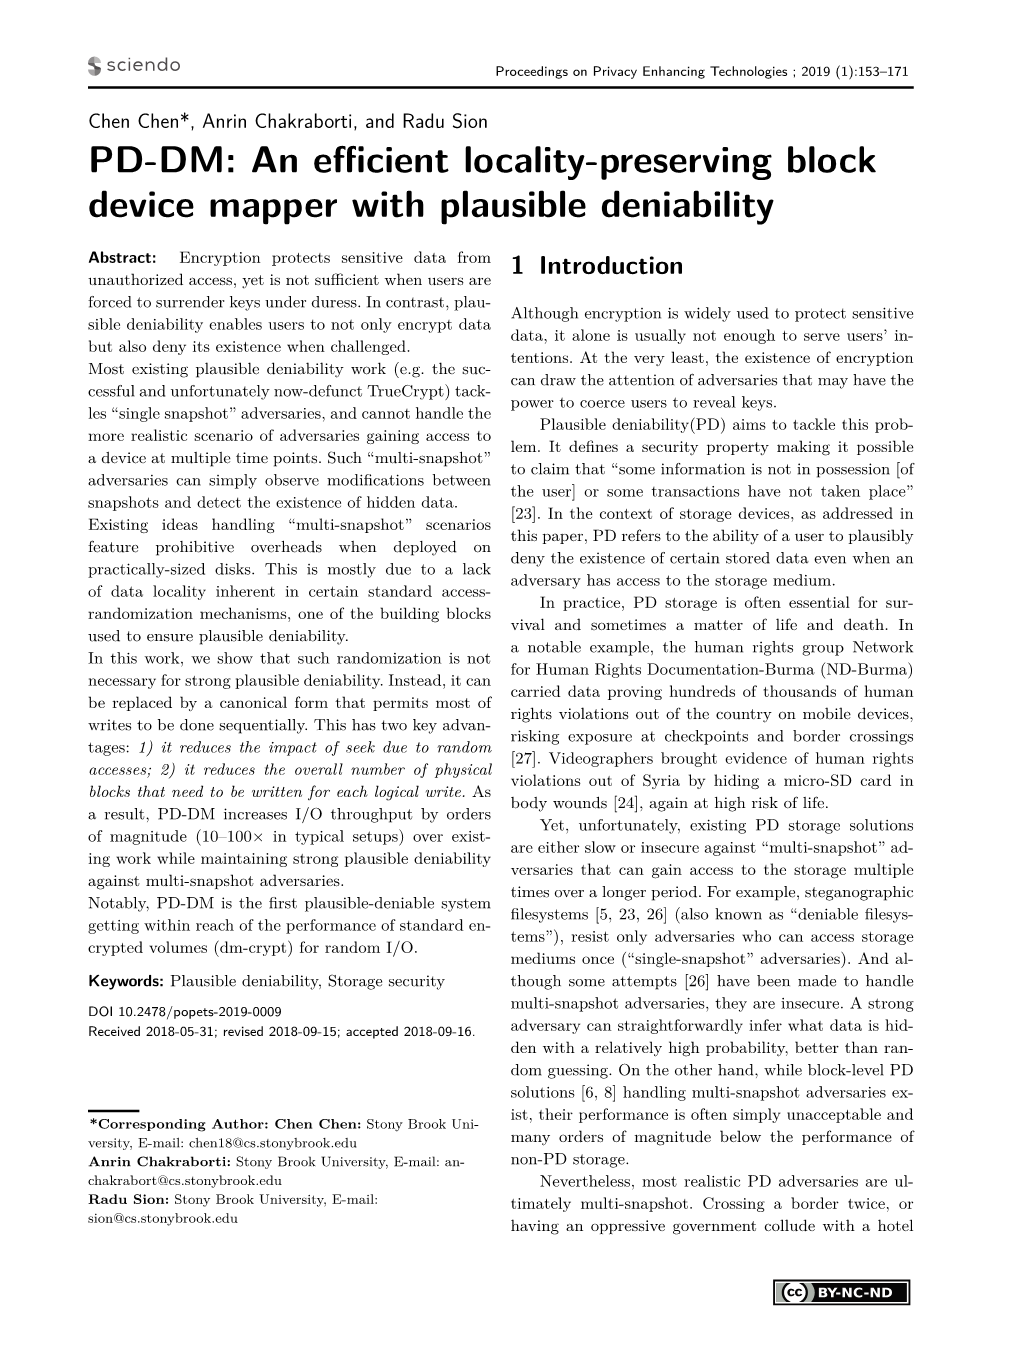 PD-DM: an Eﬃcient Locality-Preserving Block Device Mapper with Plausible Deniability